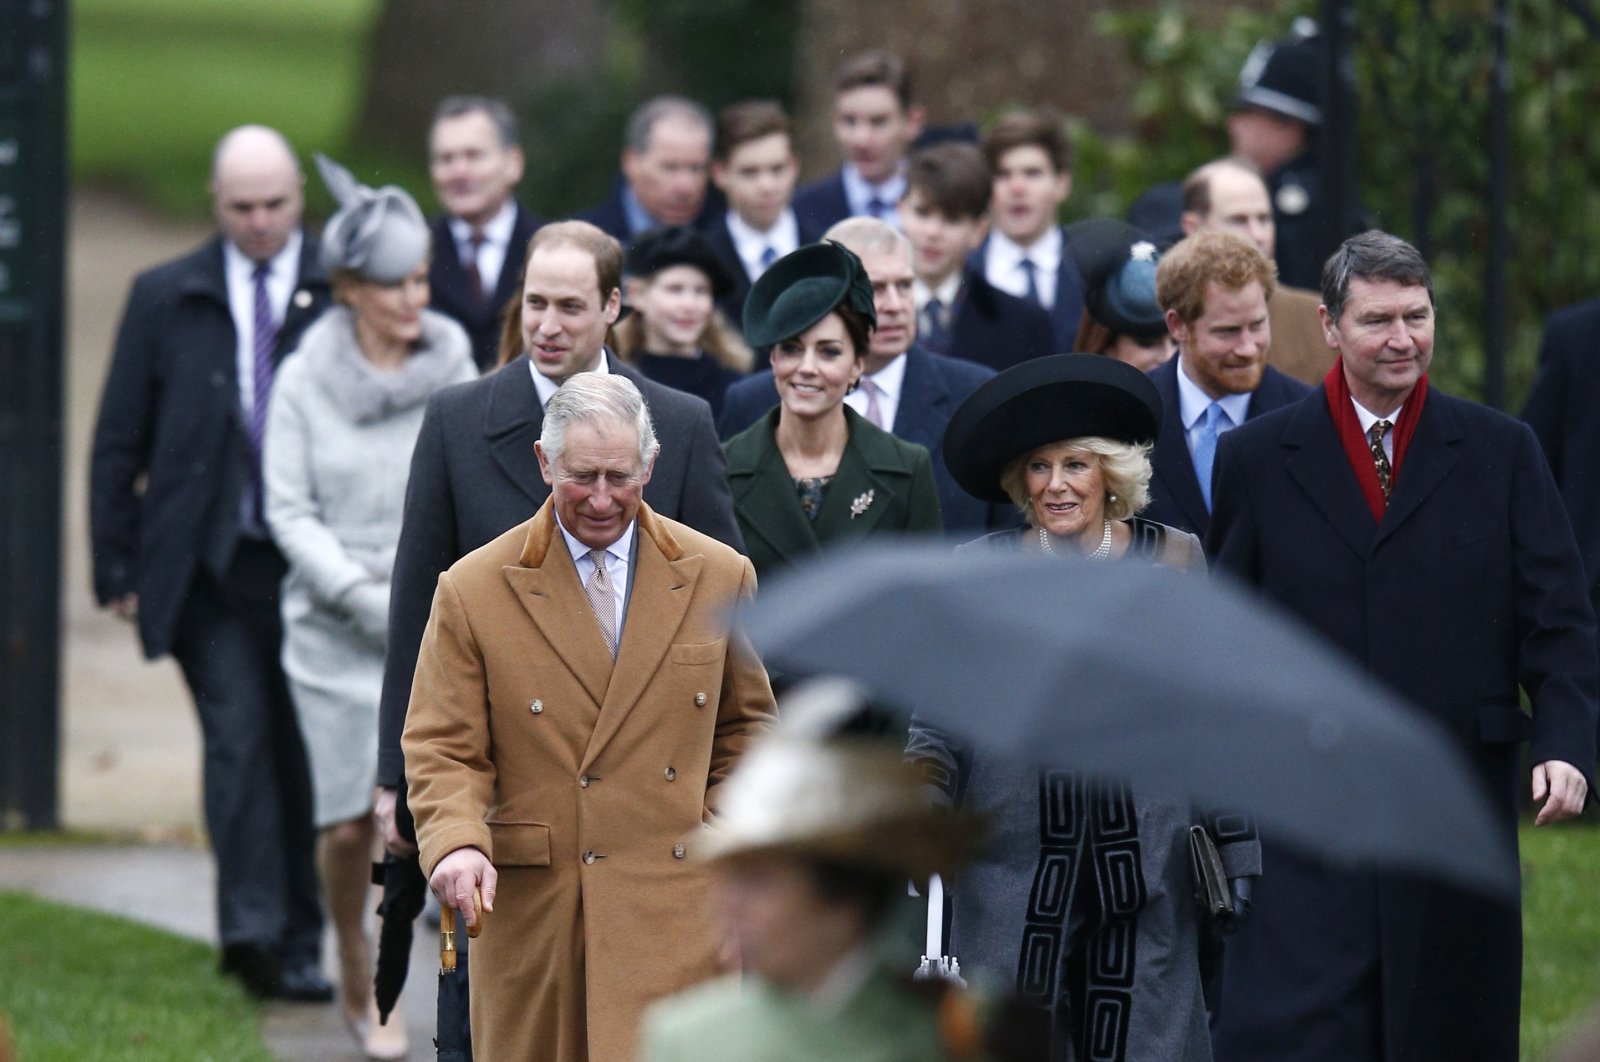 Britain&#039;s Prince Charles and his wife Camilla arrive ahead of Prince William and Kate, and other members of the royal family, to attend the Christmas Day service at church in Sandringham, eastern England, Dec. 25, 2015. (Reuters File Photo)